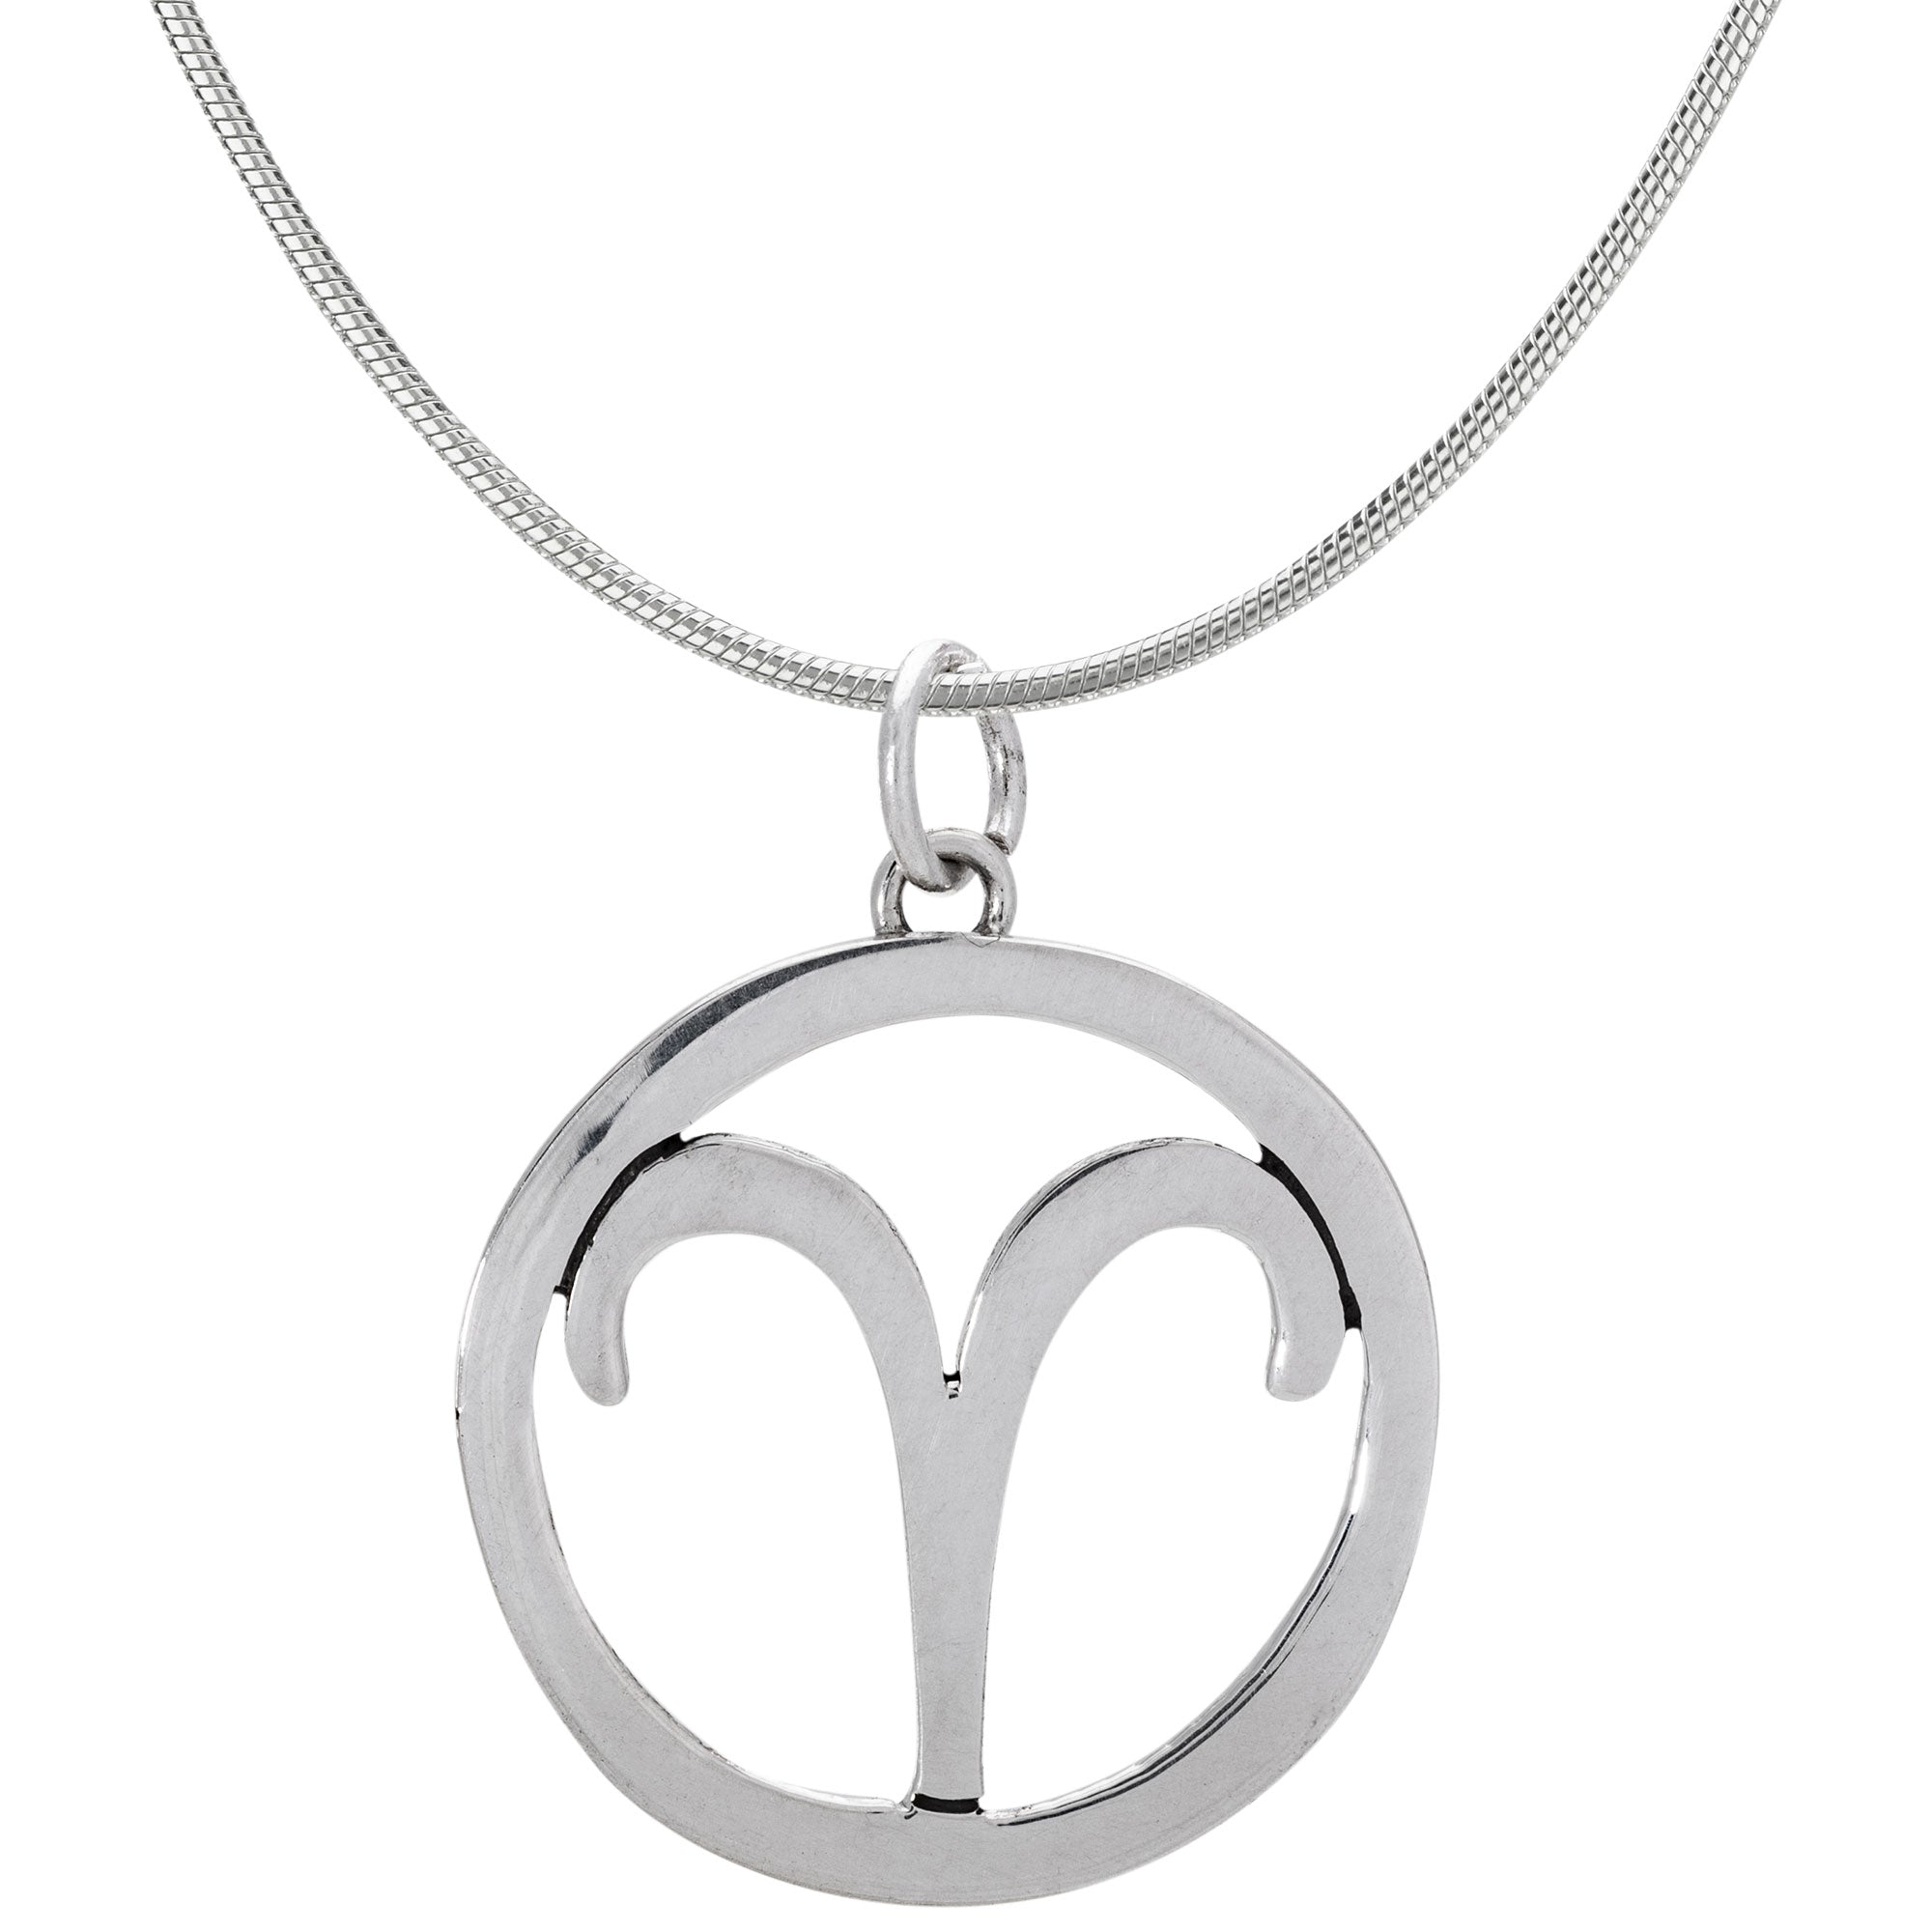 Zodiac Sign Astrology Necklace Collection - Aquarius - With Snake Chain